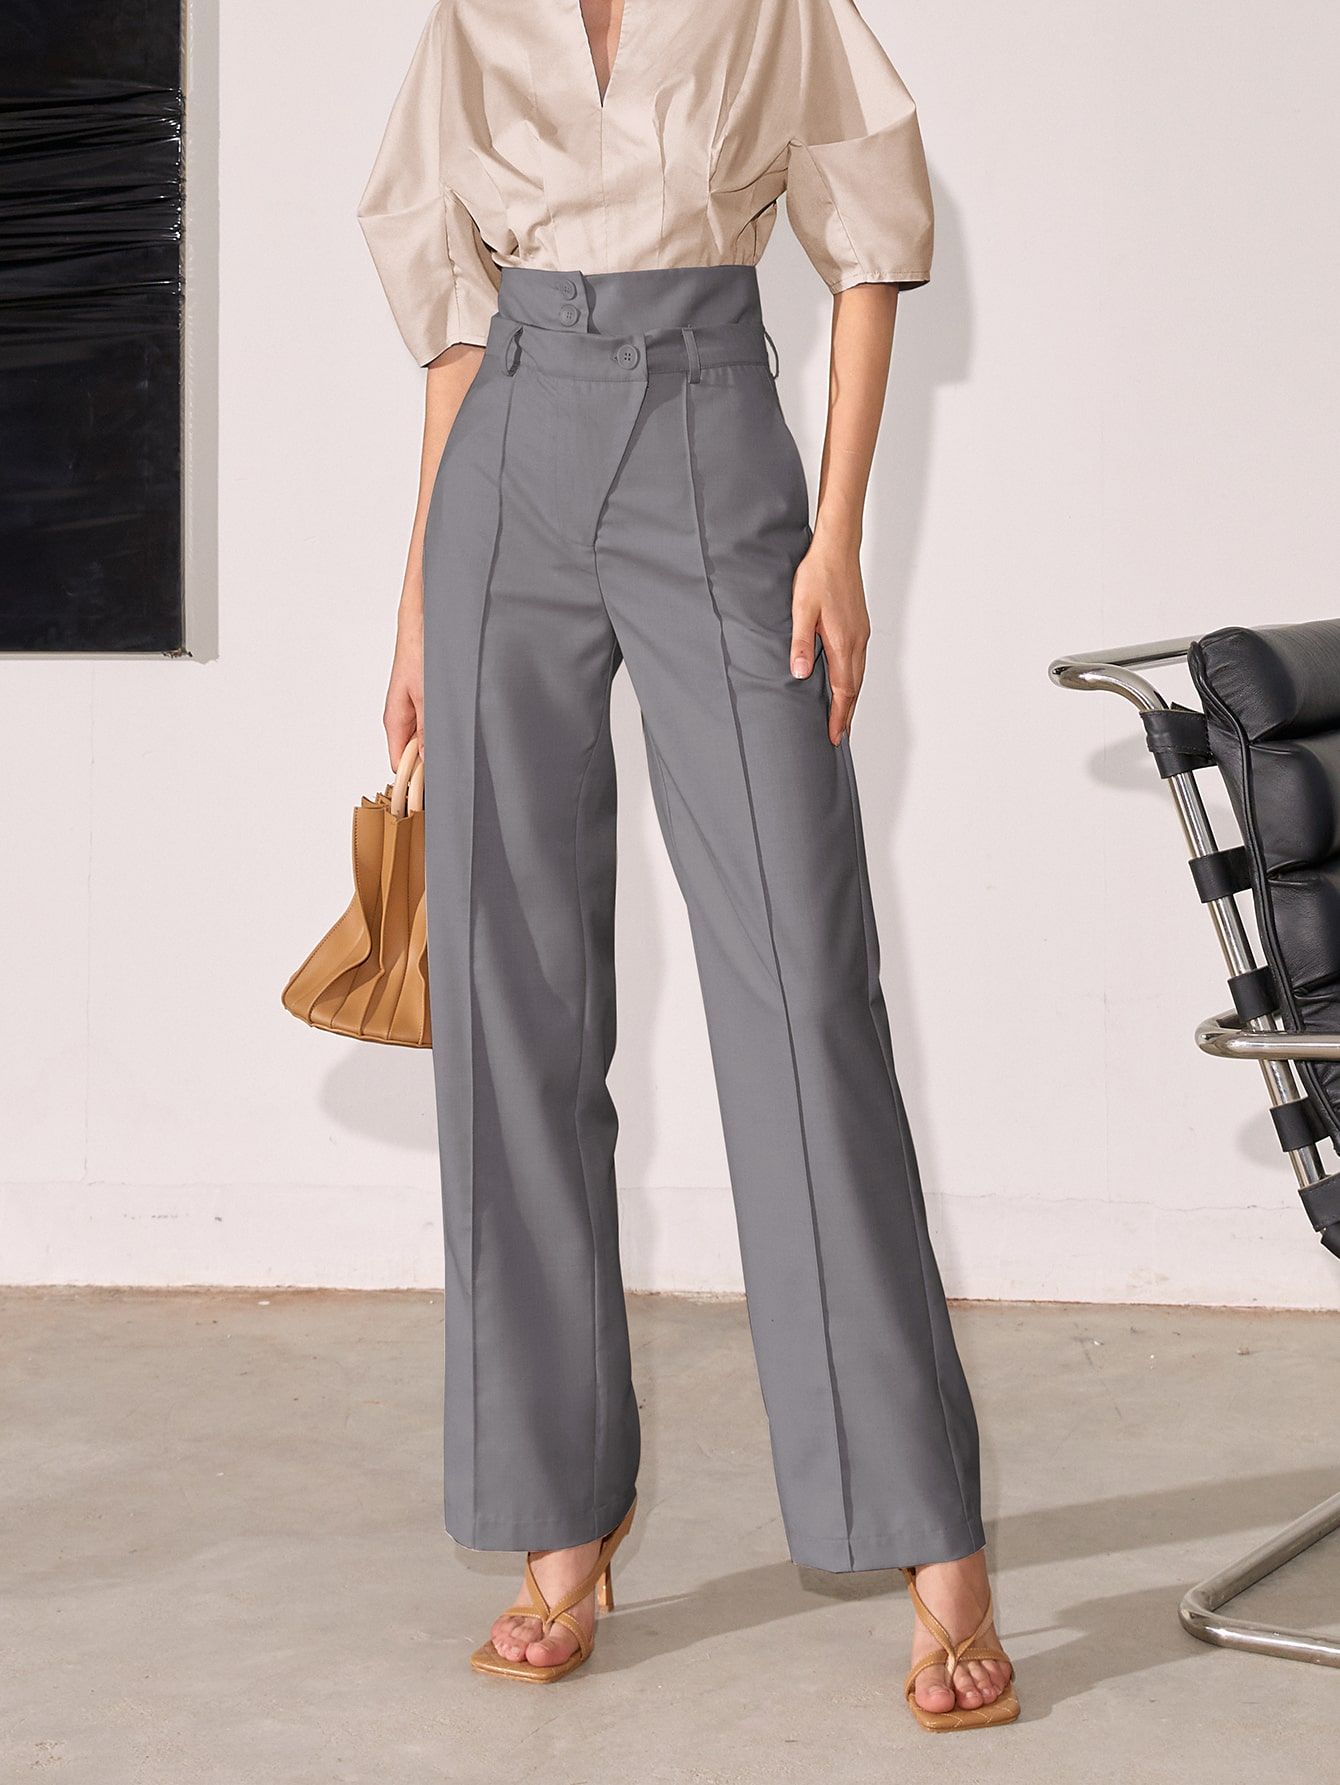 The Ultimate Guide to Finding the Perfect
Pair of Slacks for Women